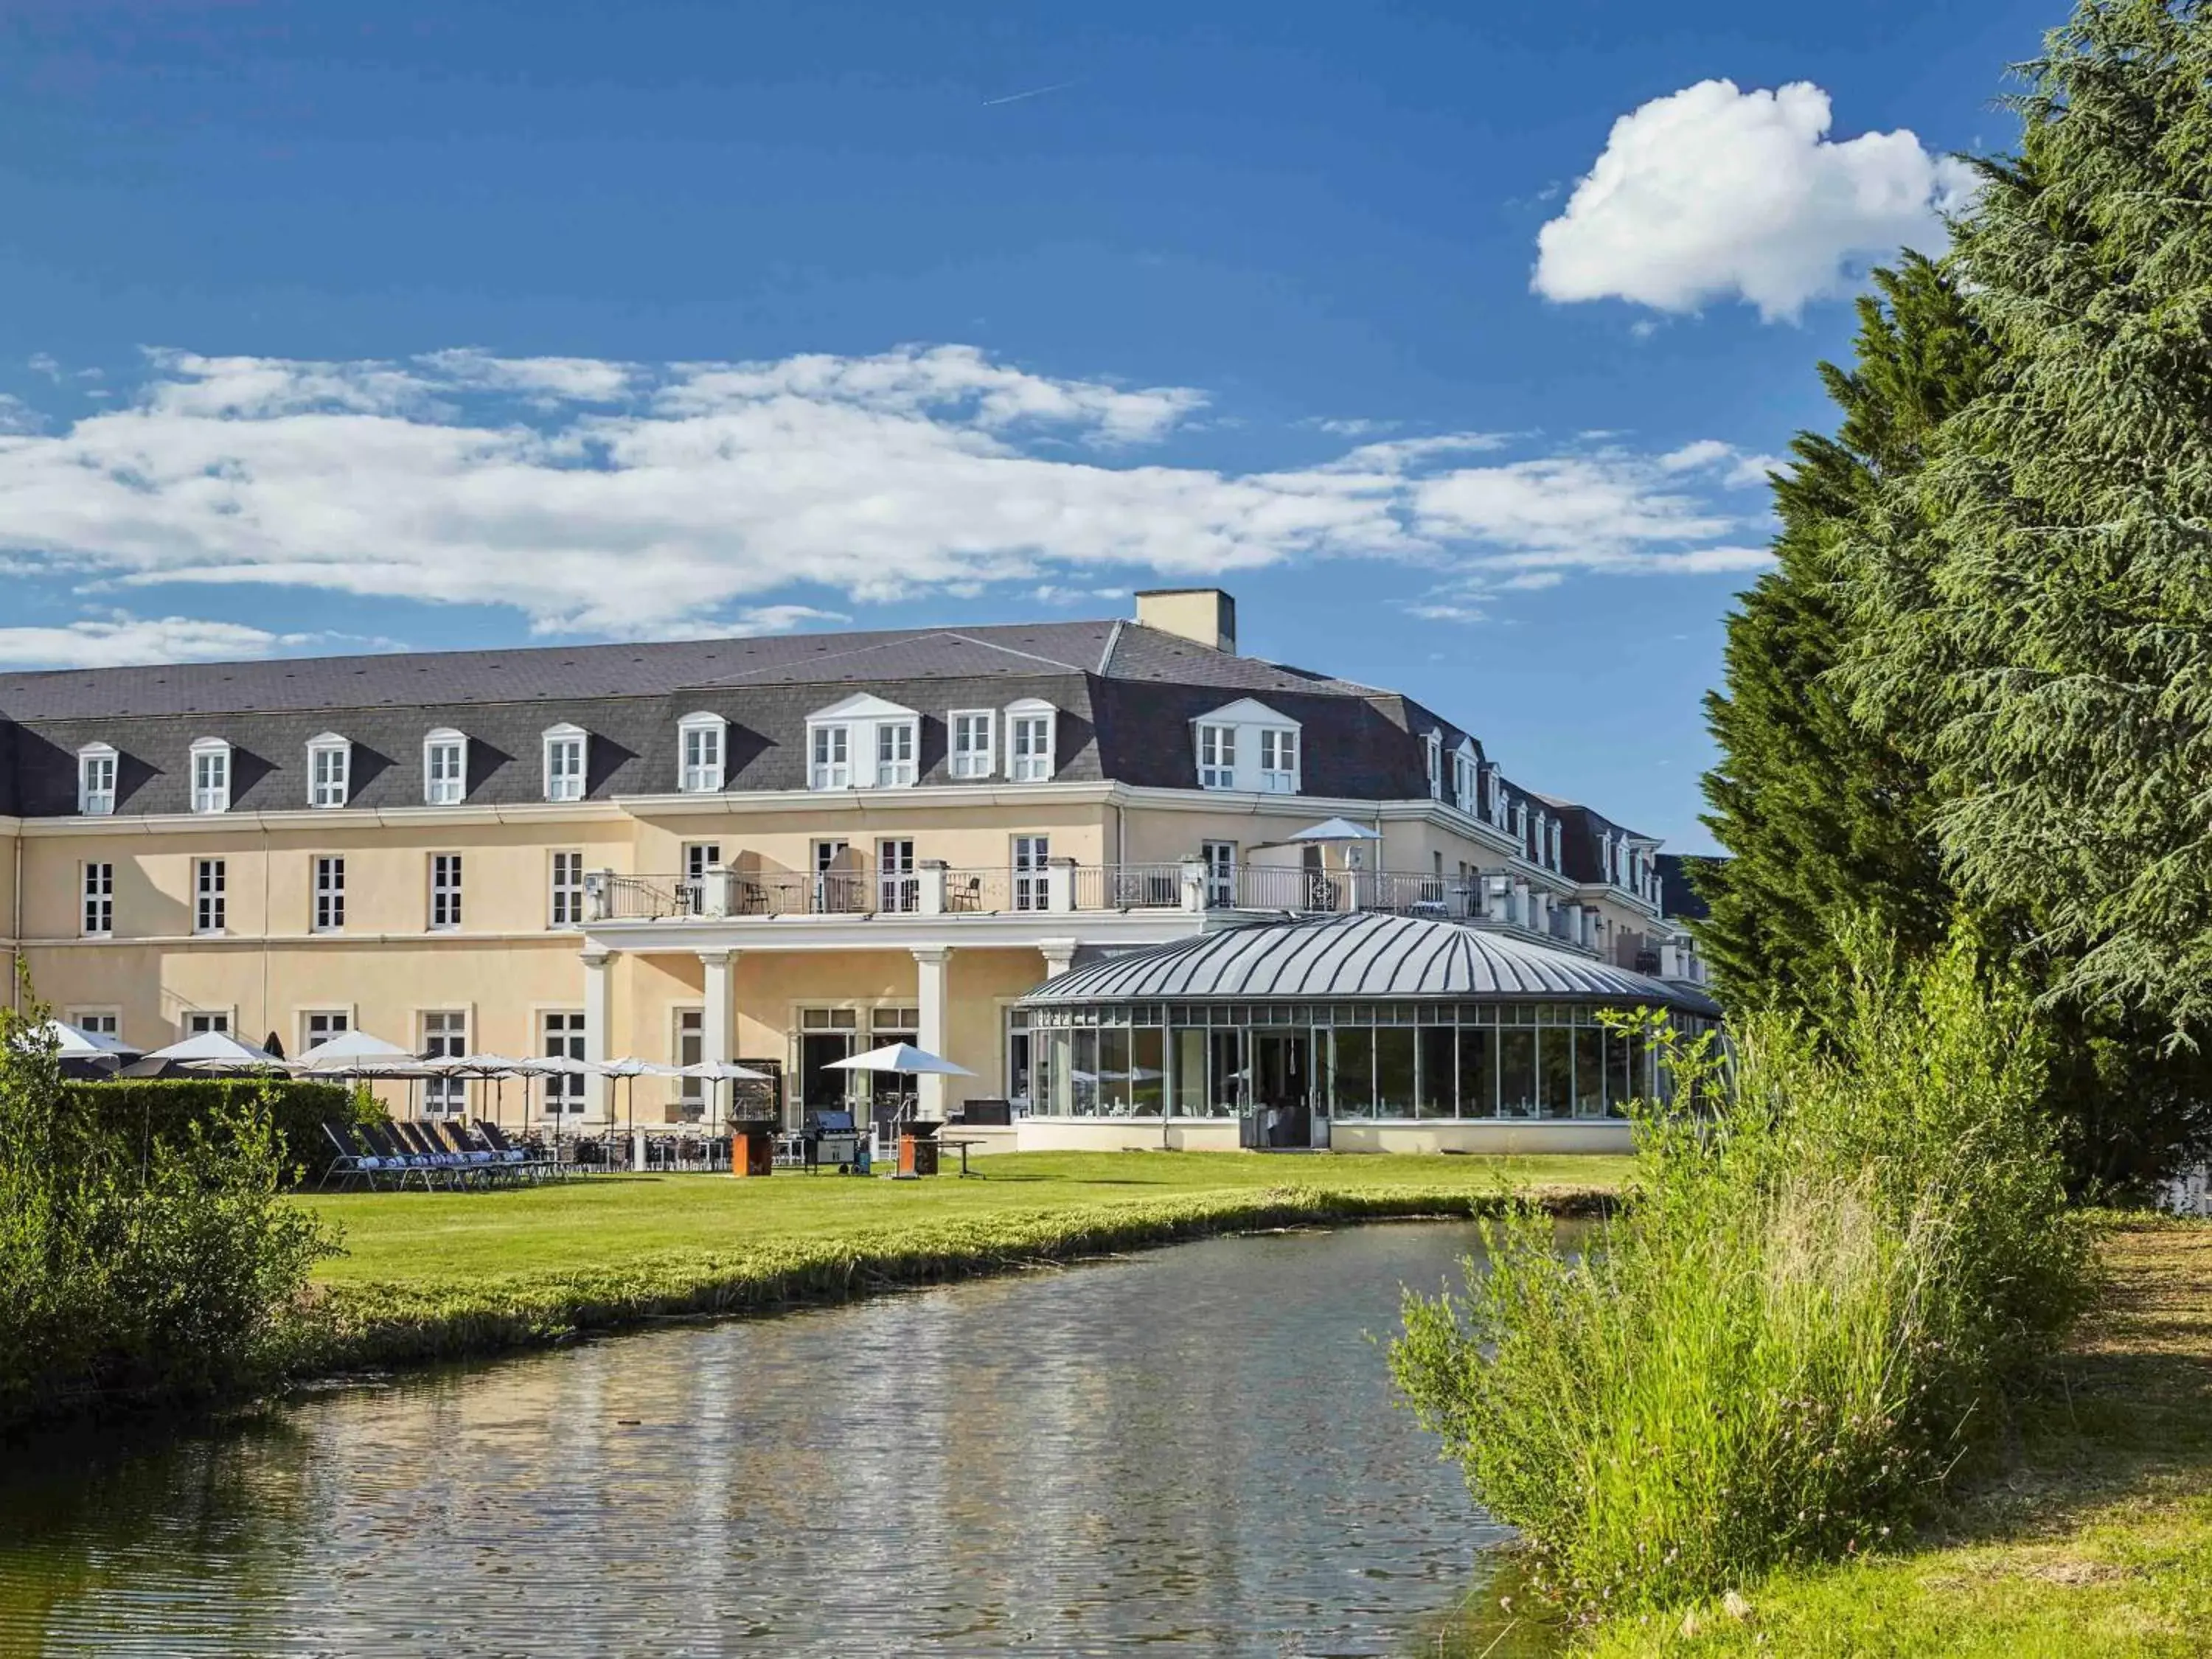 On site, Property Building in Mercure Chantilly Resort & Conventions